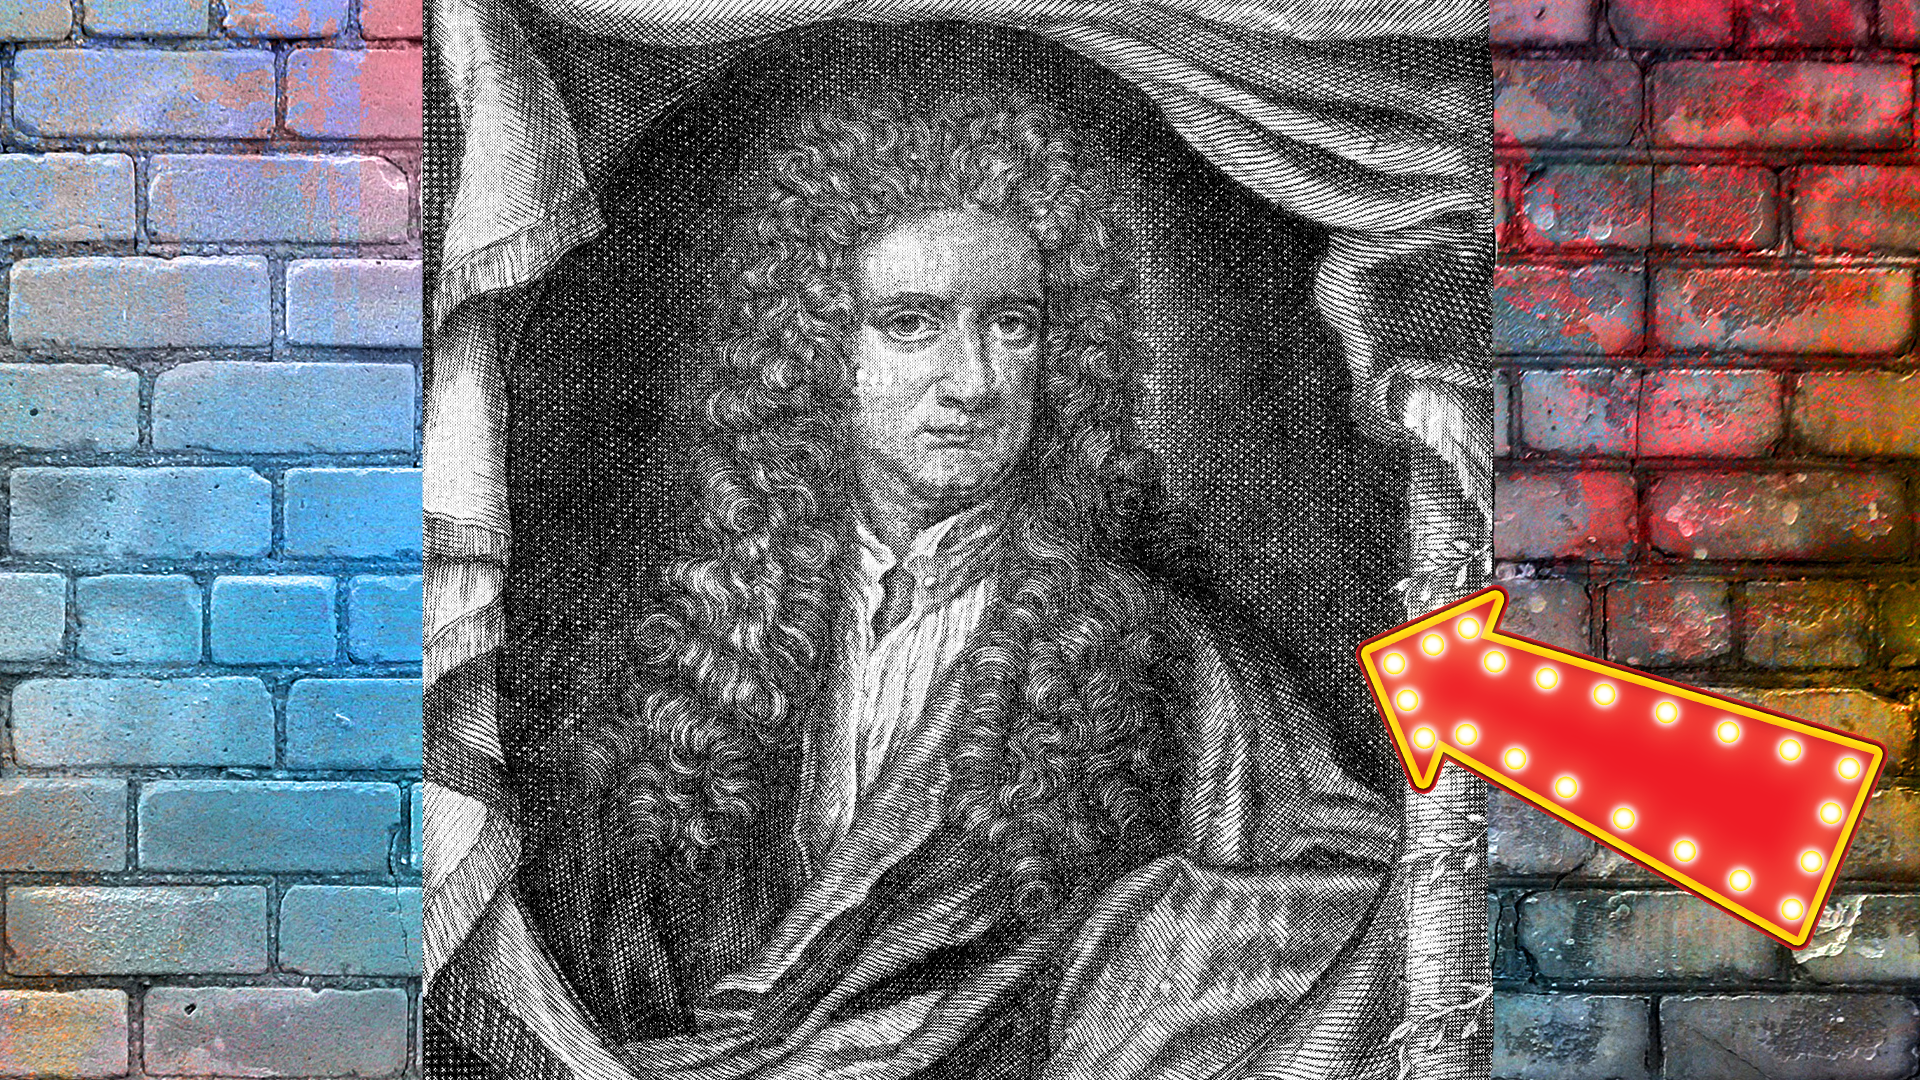 Engraving of Issac Newton on brick background with arrow